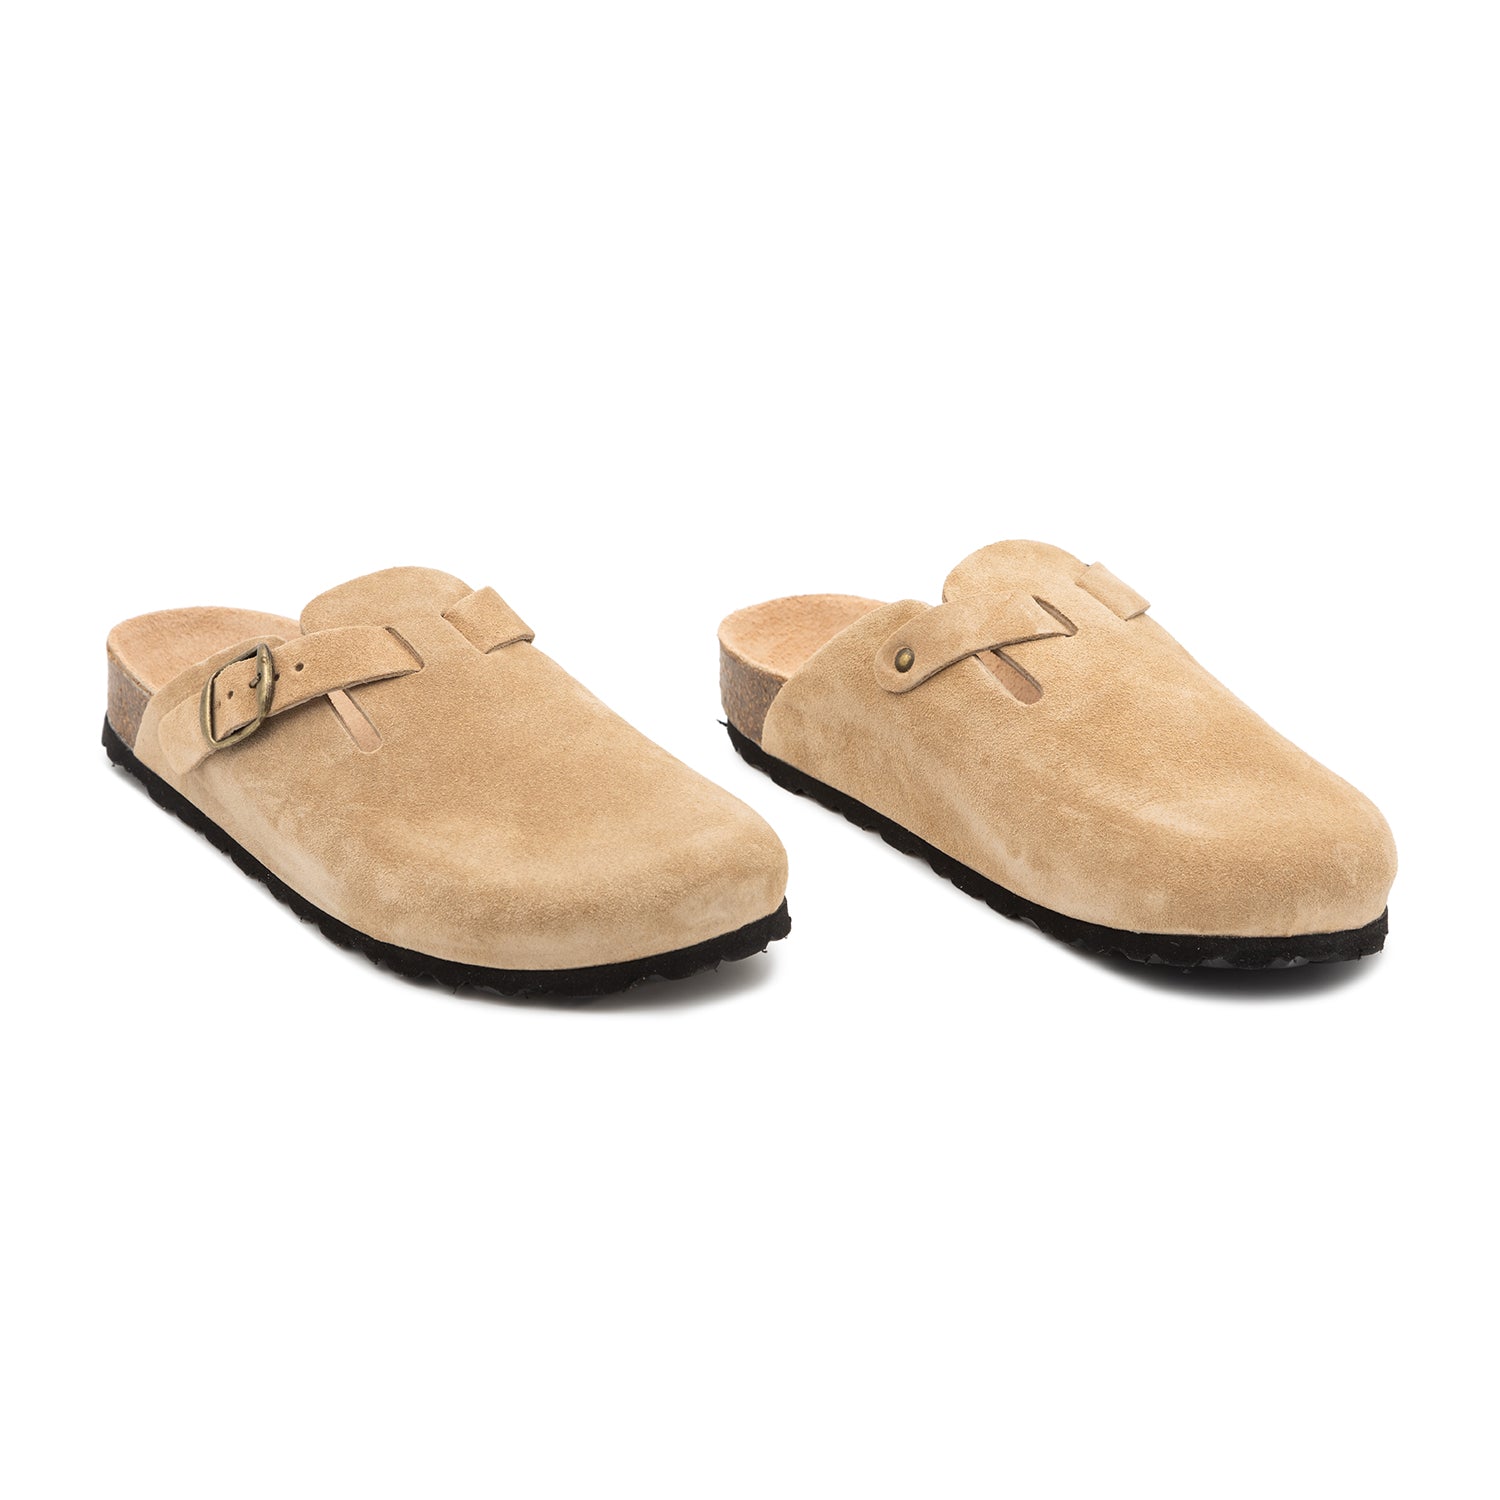 Leather Clog with Fur Lining Sandal For Women - 1726 M Van Ghog